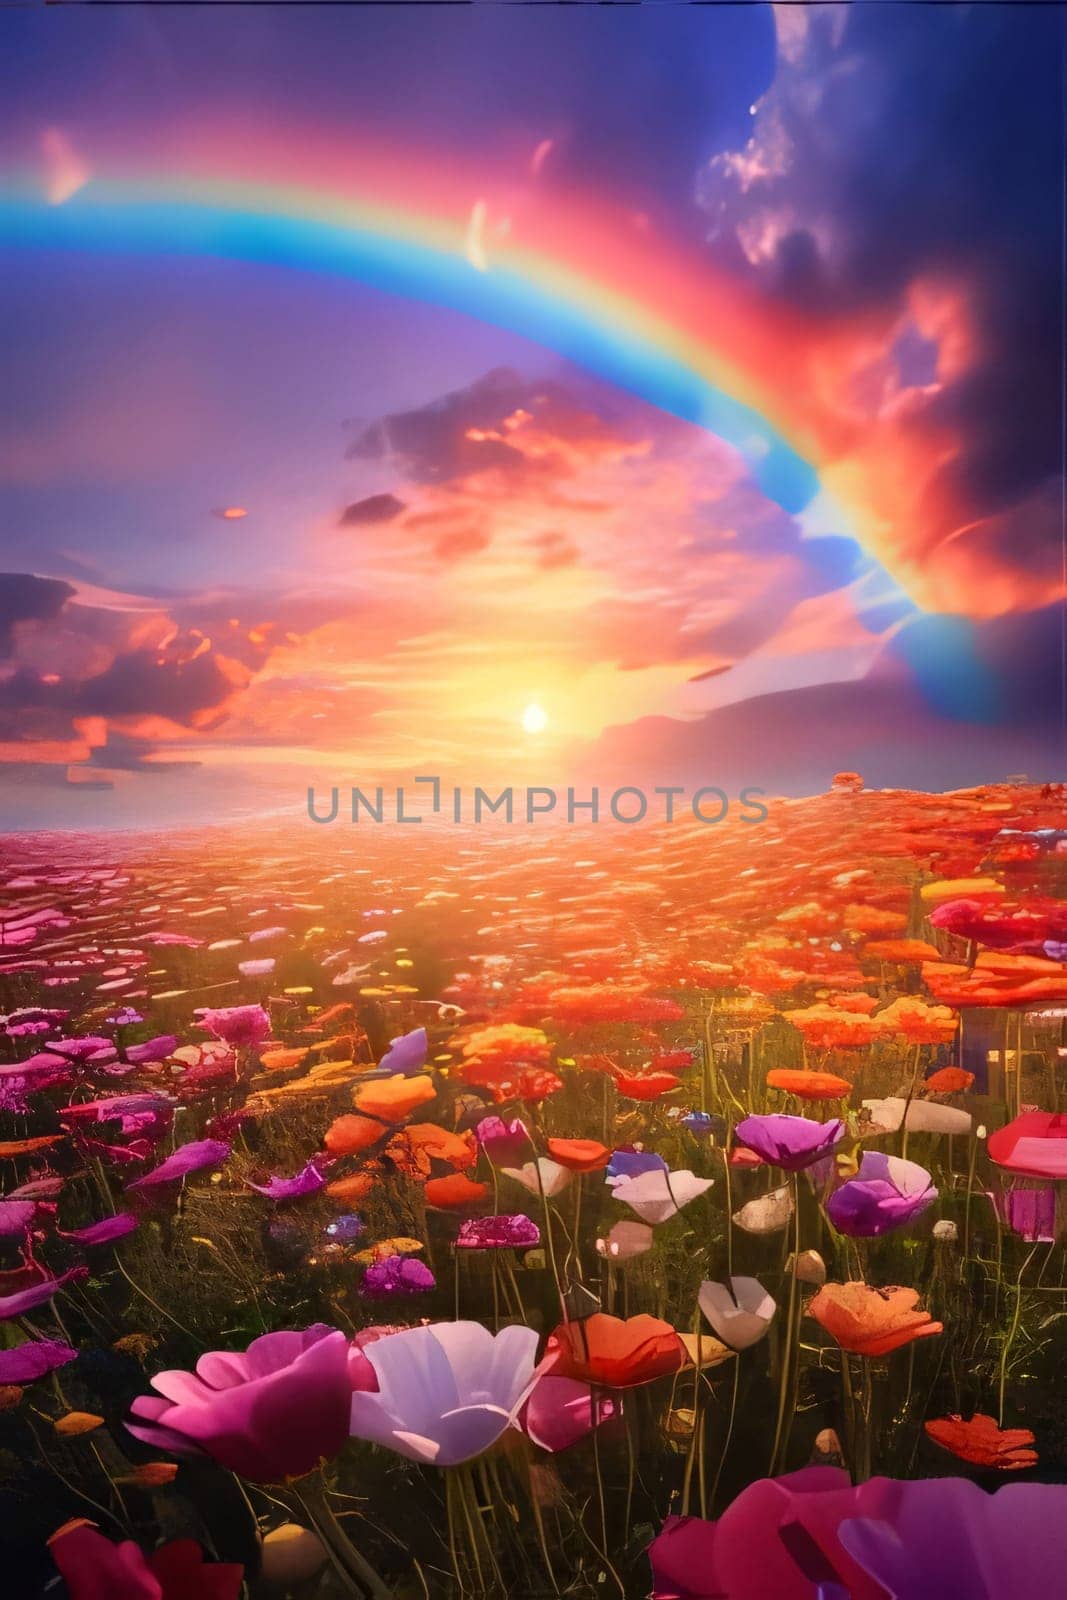 A field with colorful flowers at sunset, a rainbow in the sky. Flowering flowers, a symbol of spring, new life. A joyful time of nature waking up to life.